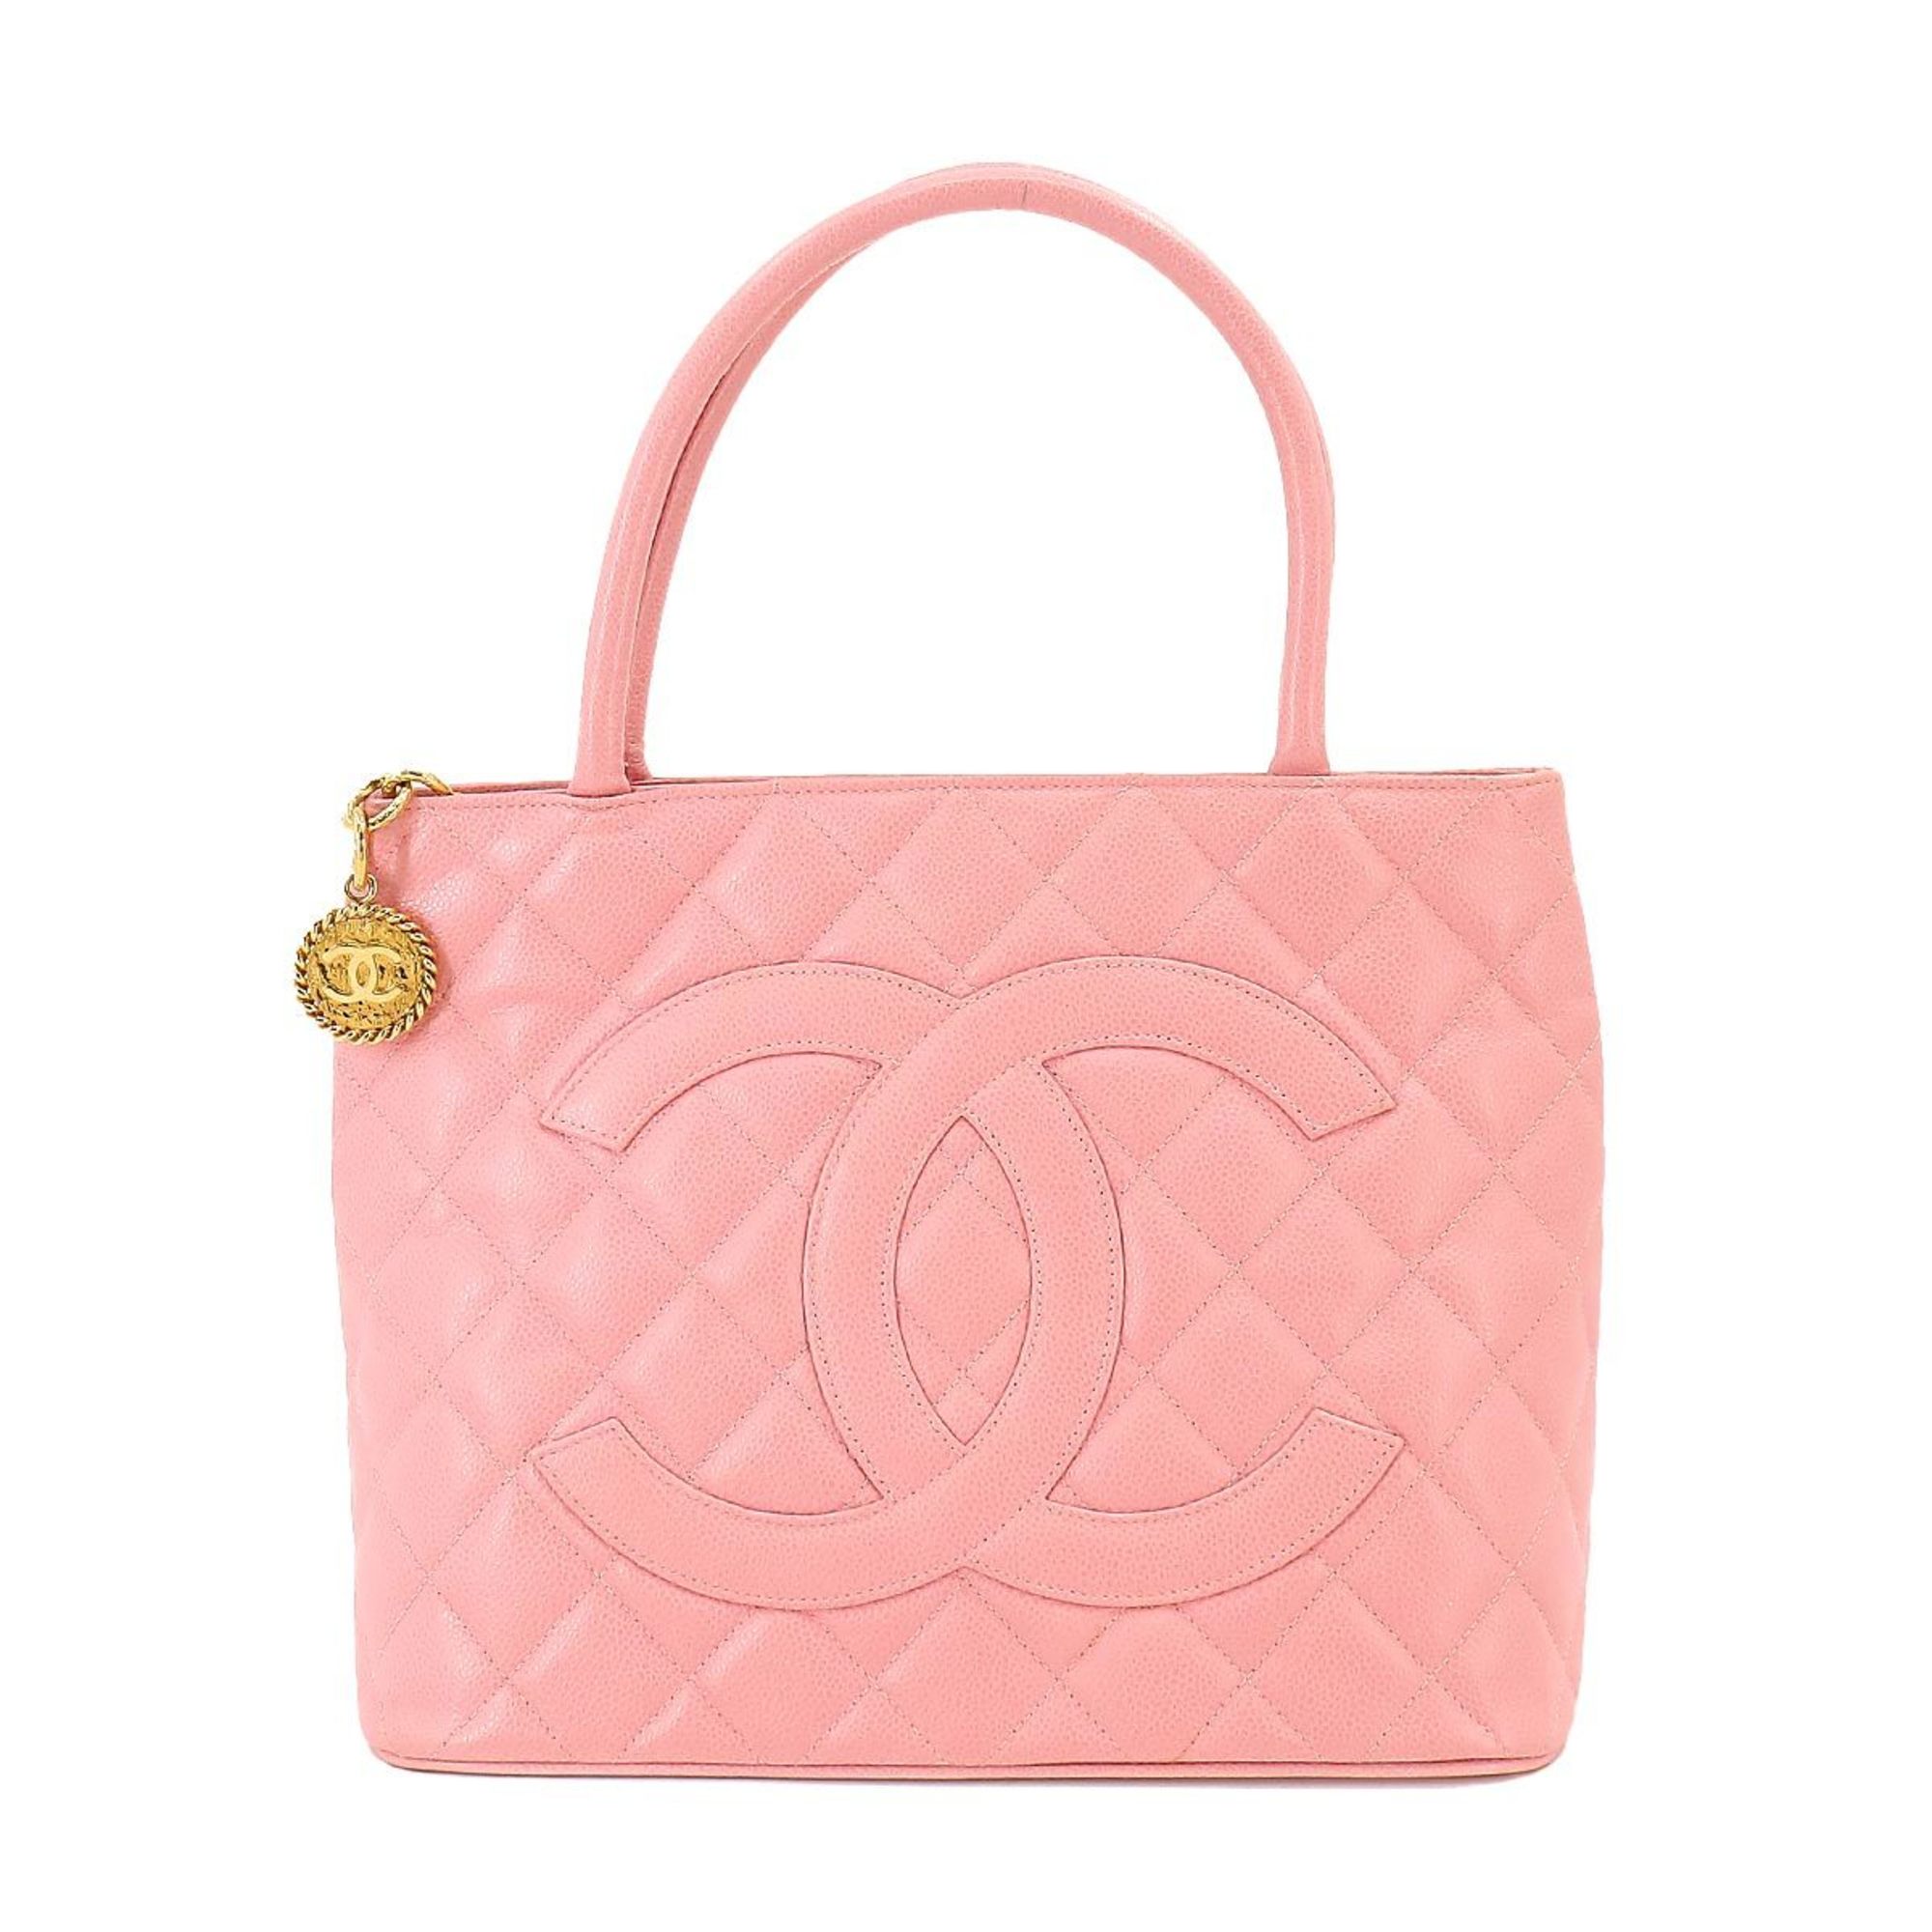 CHANEL Reproduction Tote Bag Caviar Skin Pink A01804 Gold Hardware Vintage Medallion